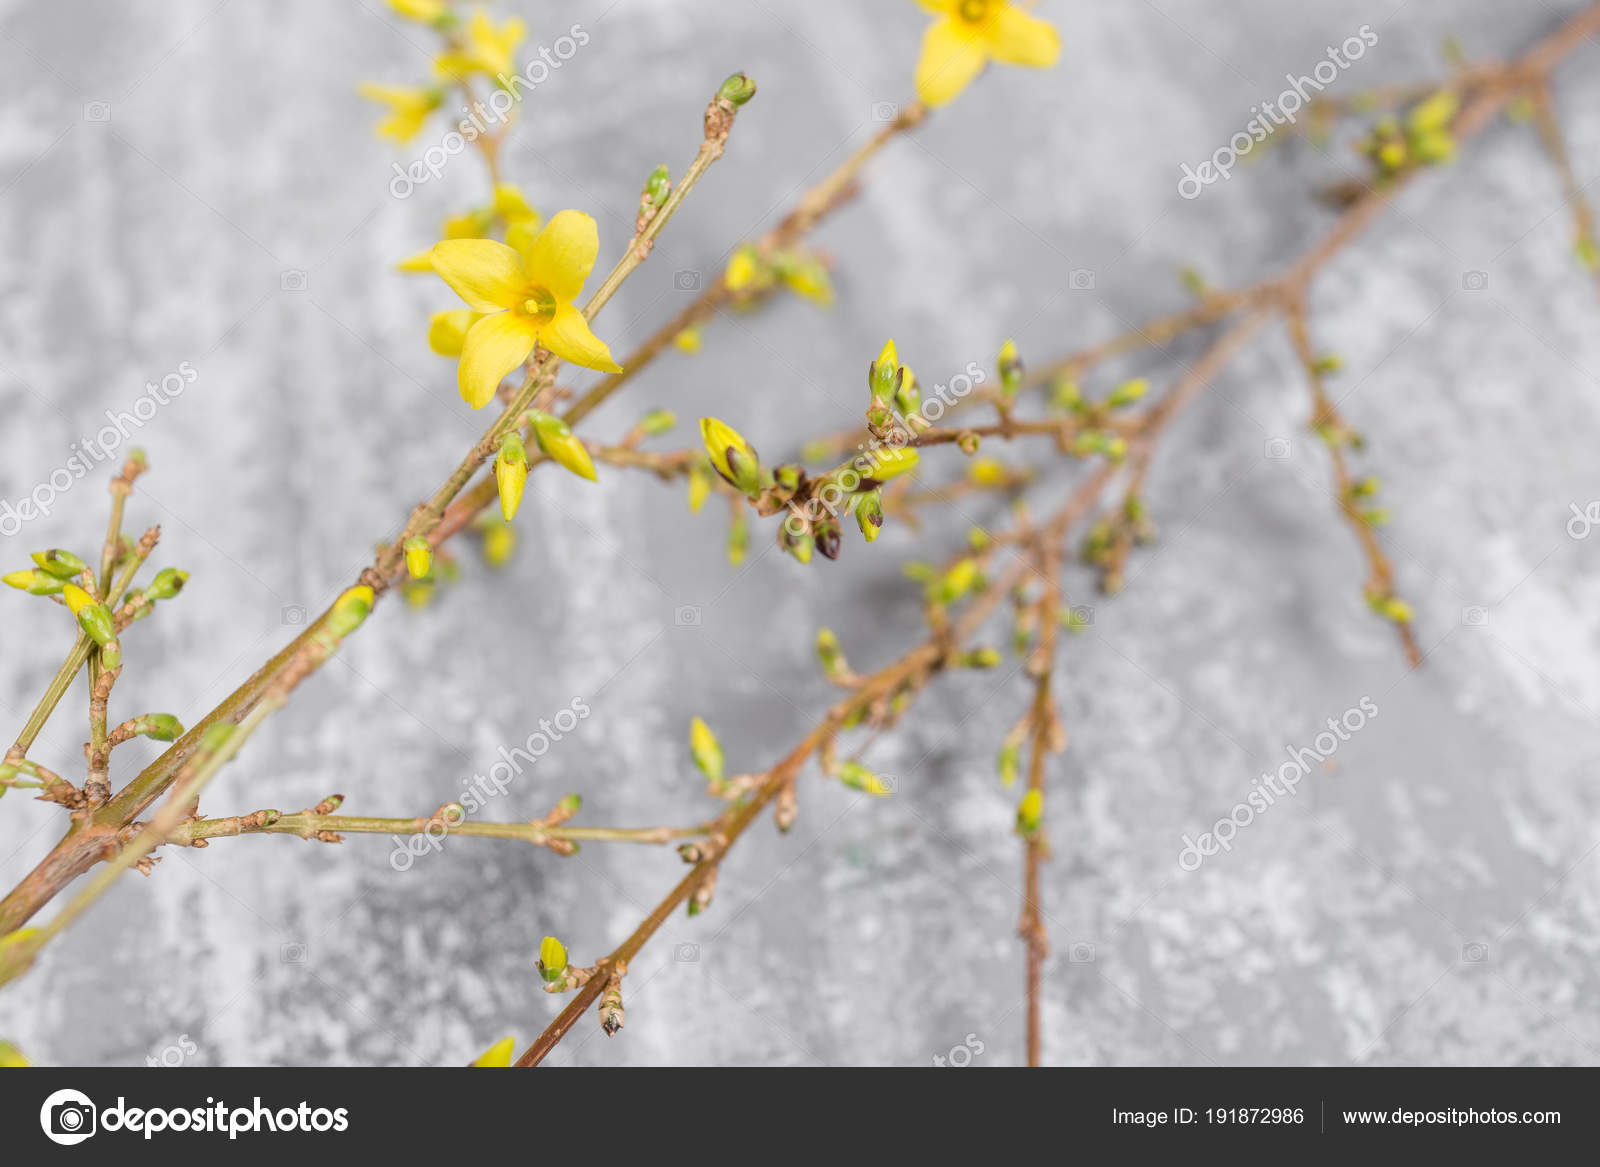 Yellow Forsythia Suspensa Spring Flowers Bloom From Buds On The Branches Gray Background Stock Photo C Malkovkosta